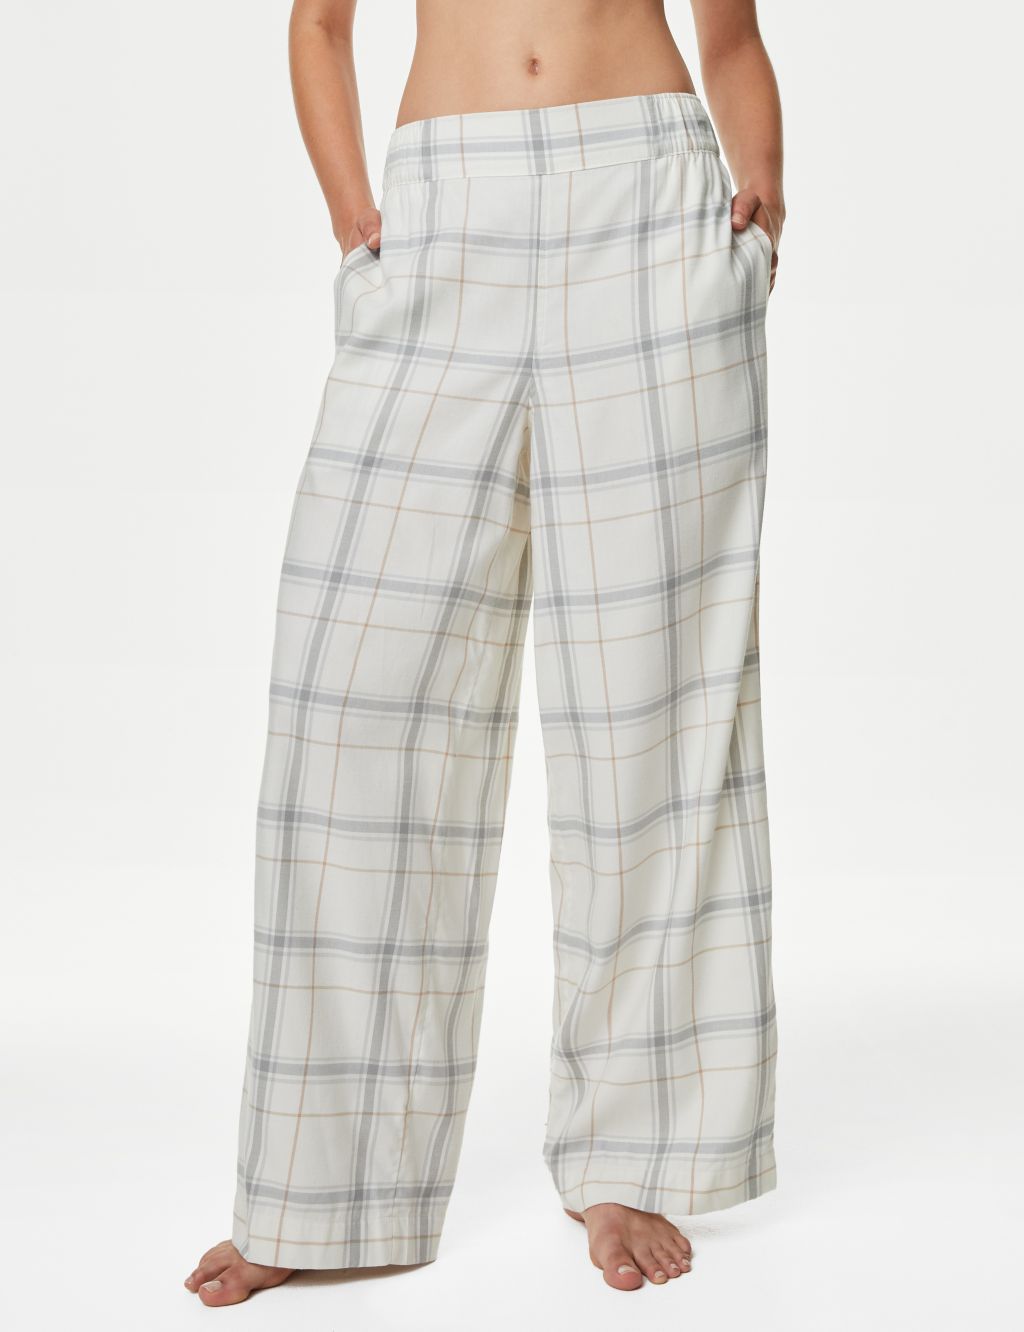 Cotton Rich Woven Checked Lounge Pants image 3